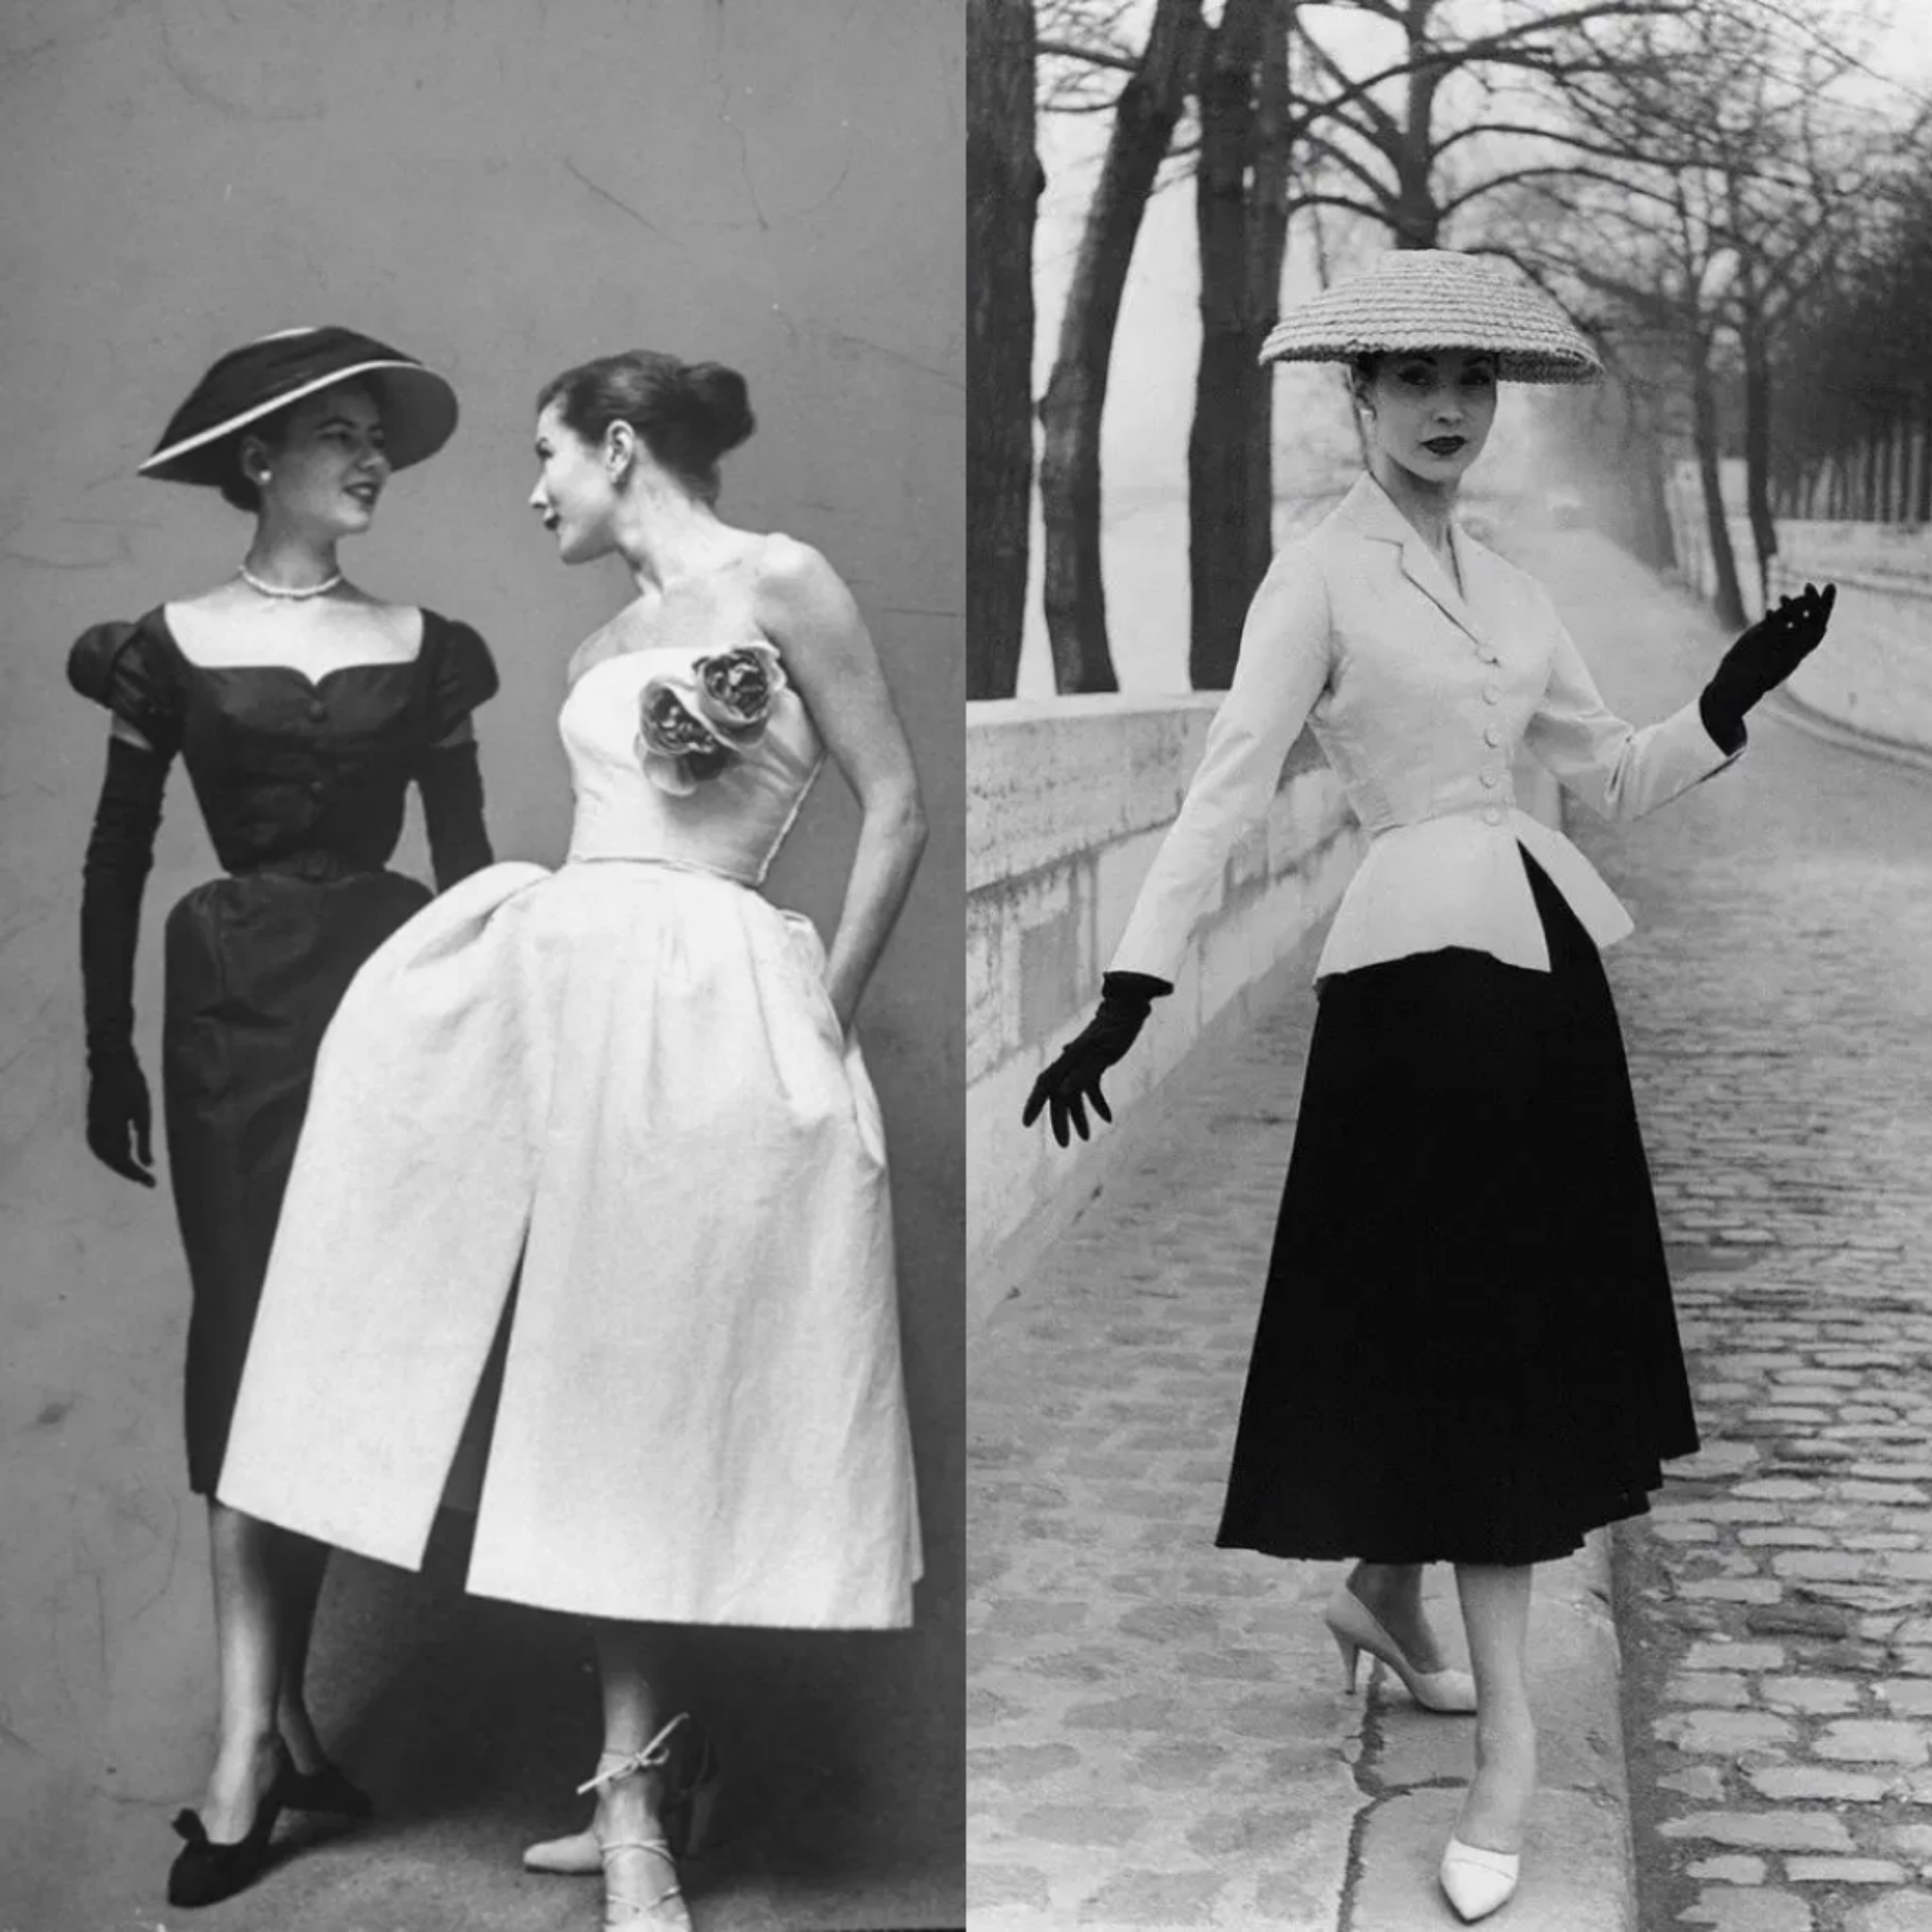 Dior NEW LOOK- 1950s fashion trend